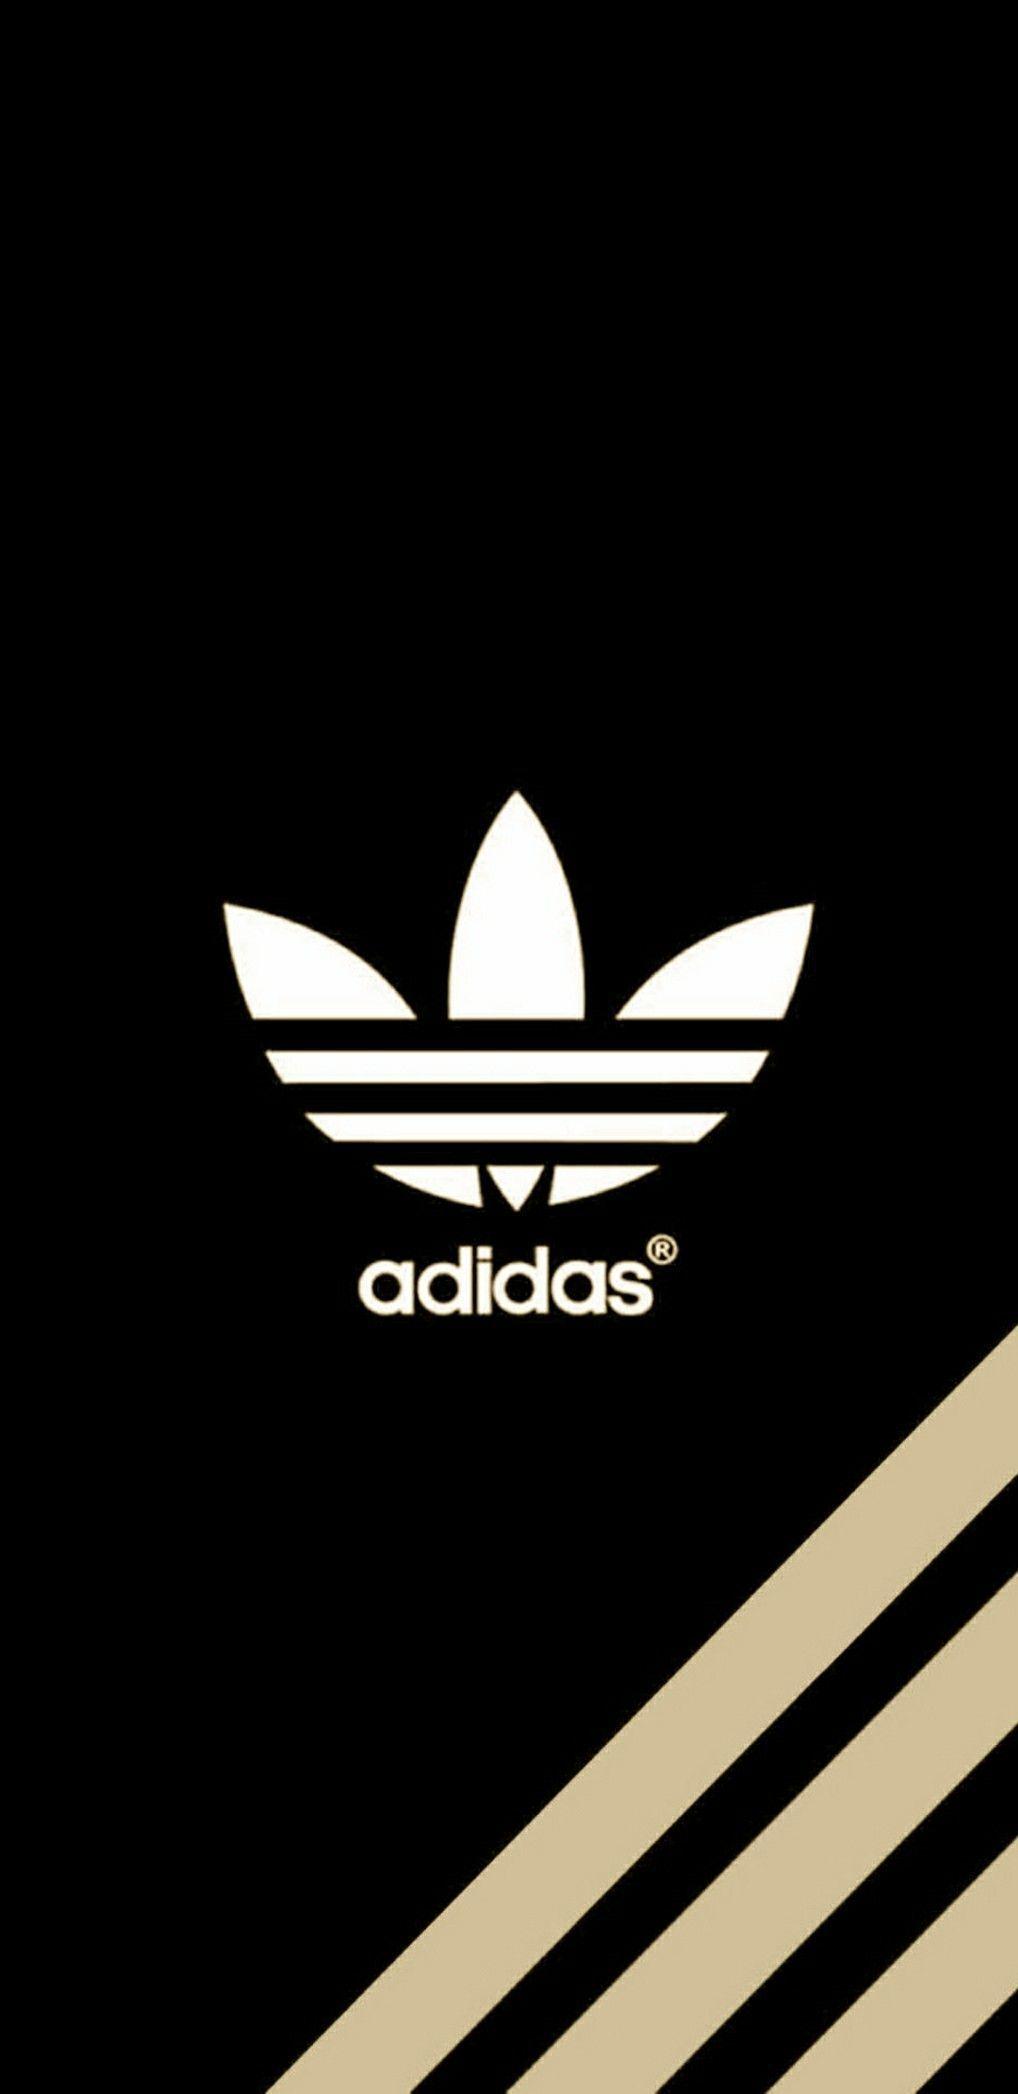 Adidas Aesthetic Wallpapers - Wallpaper Cave